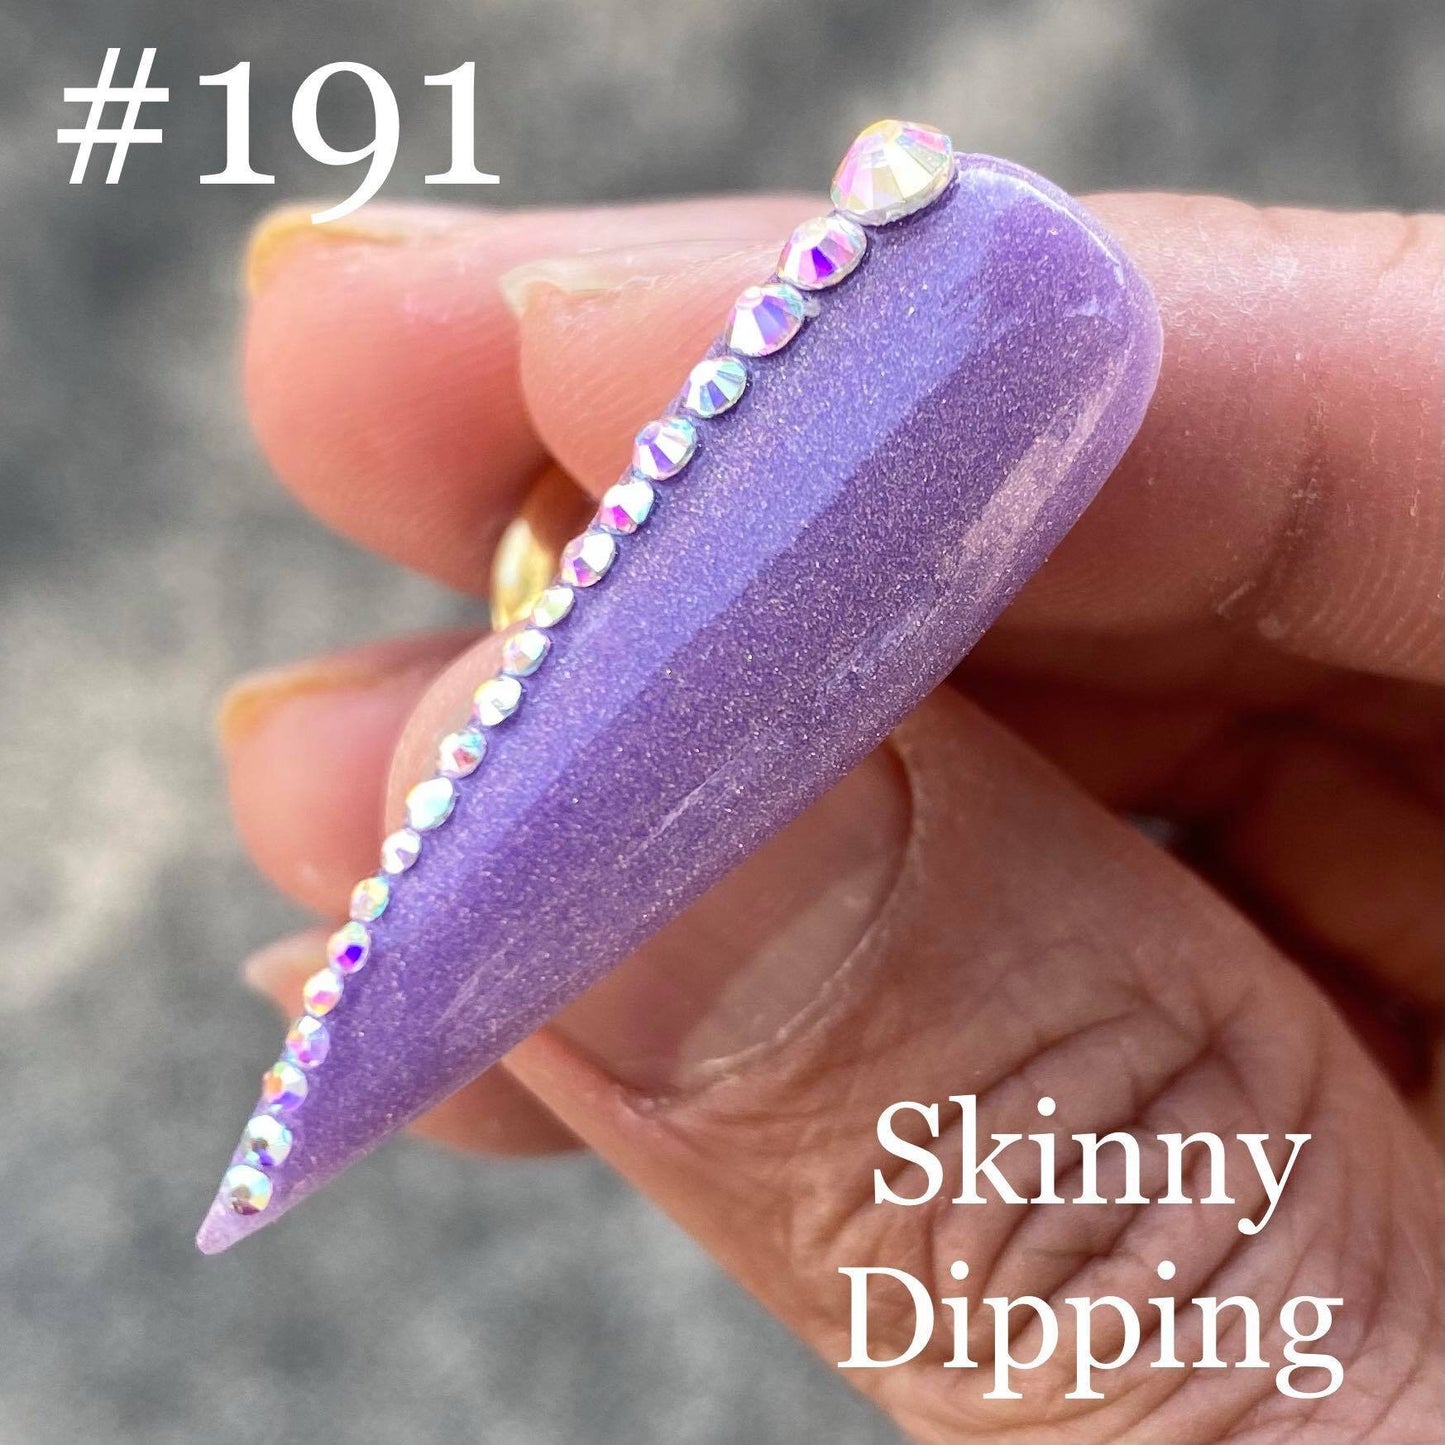 DCH191 Skinny Dipping